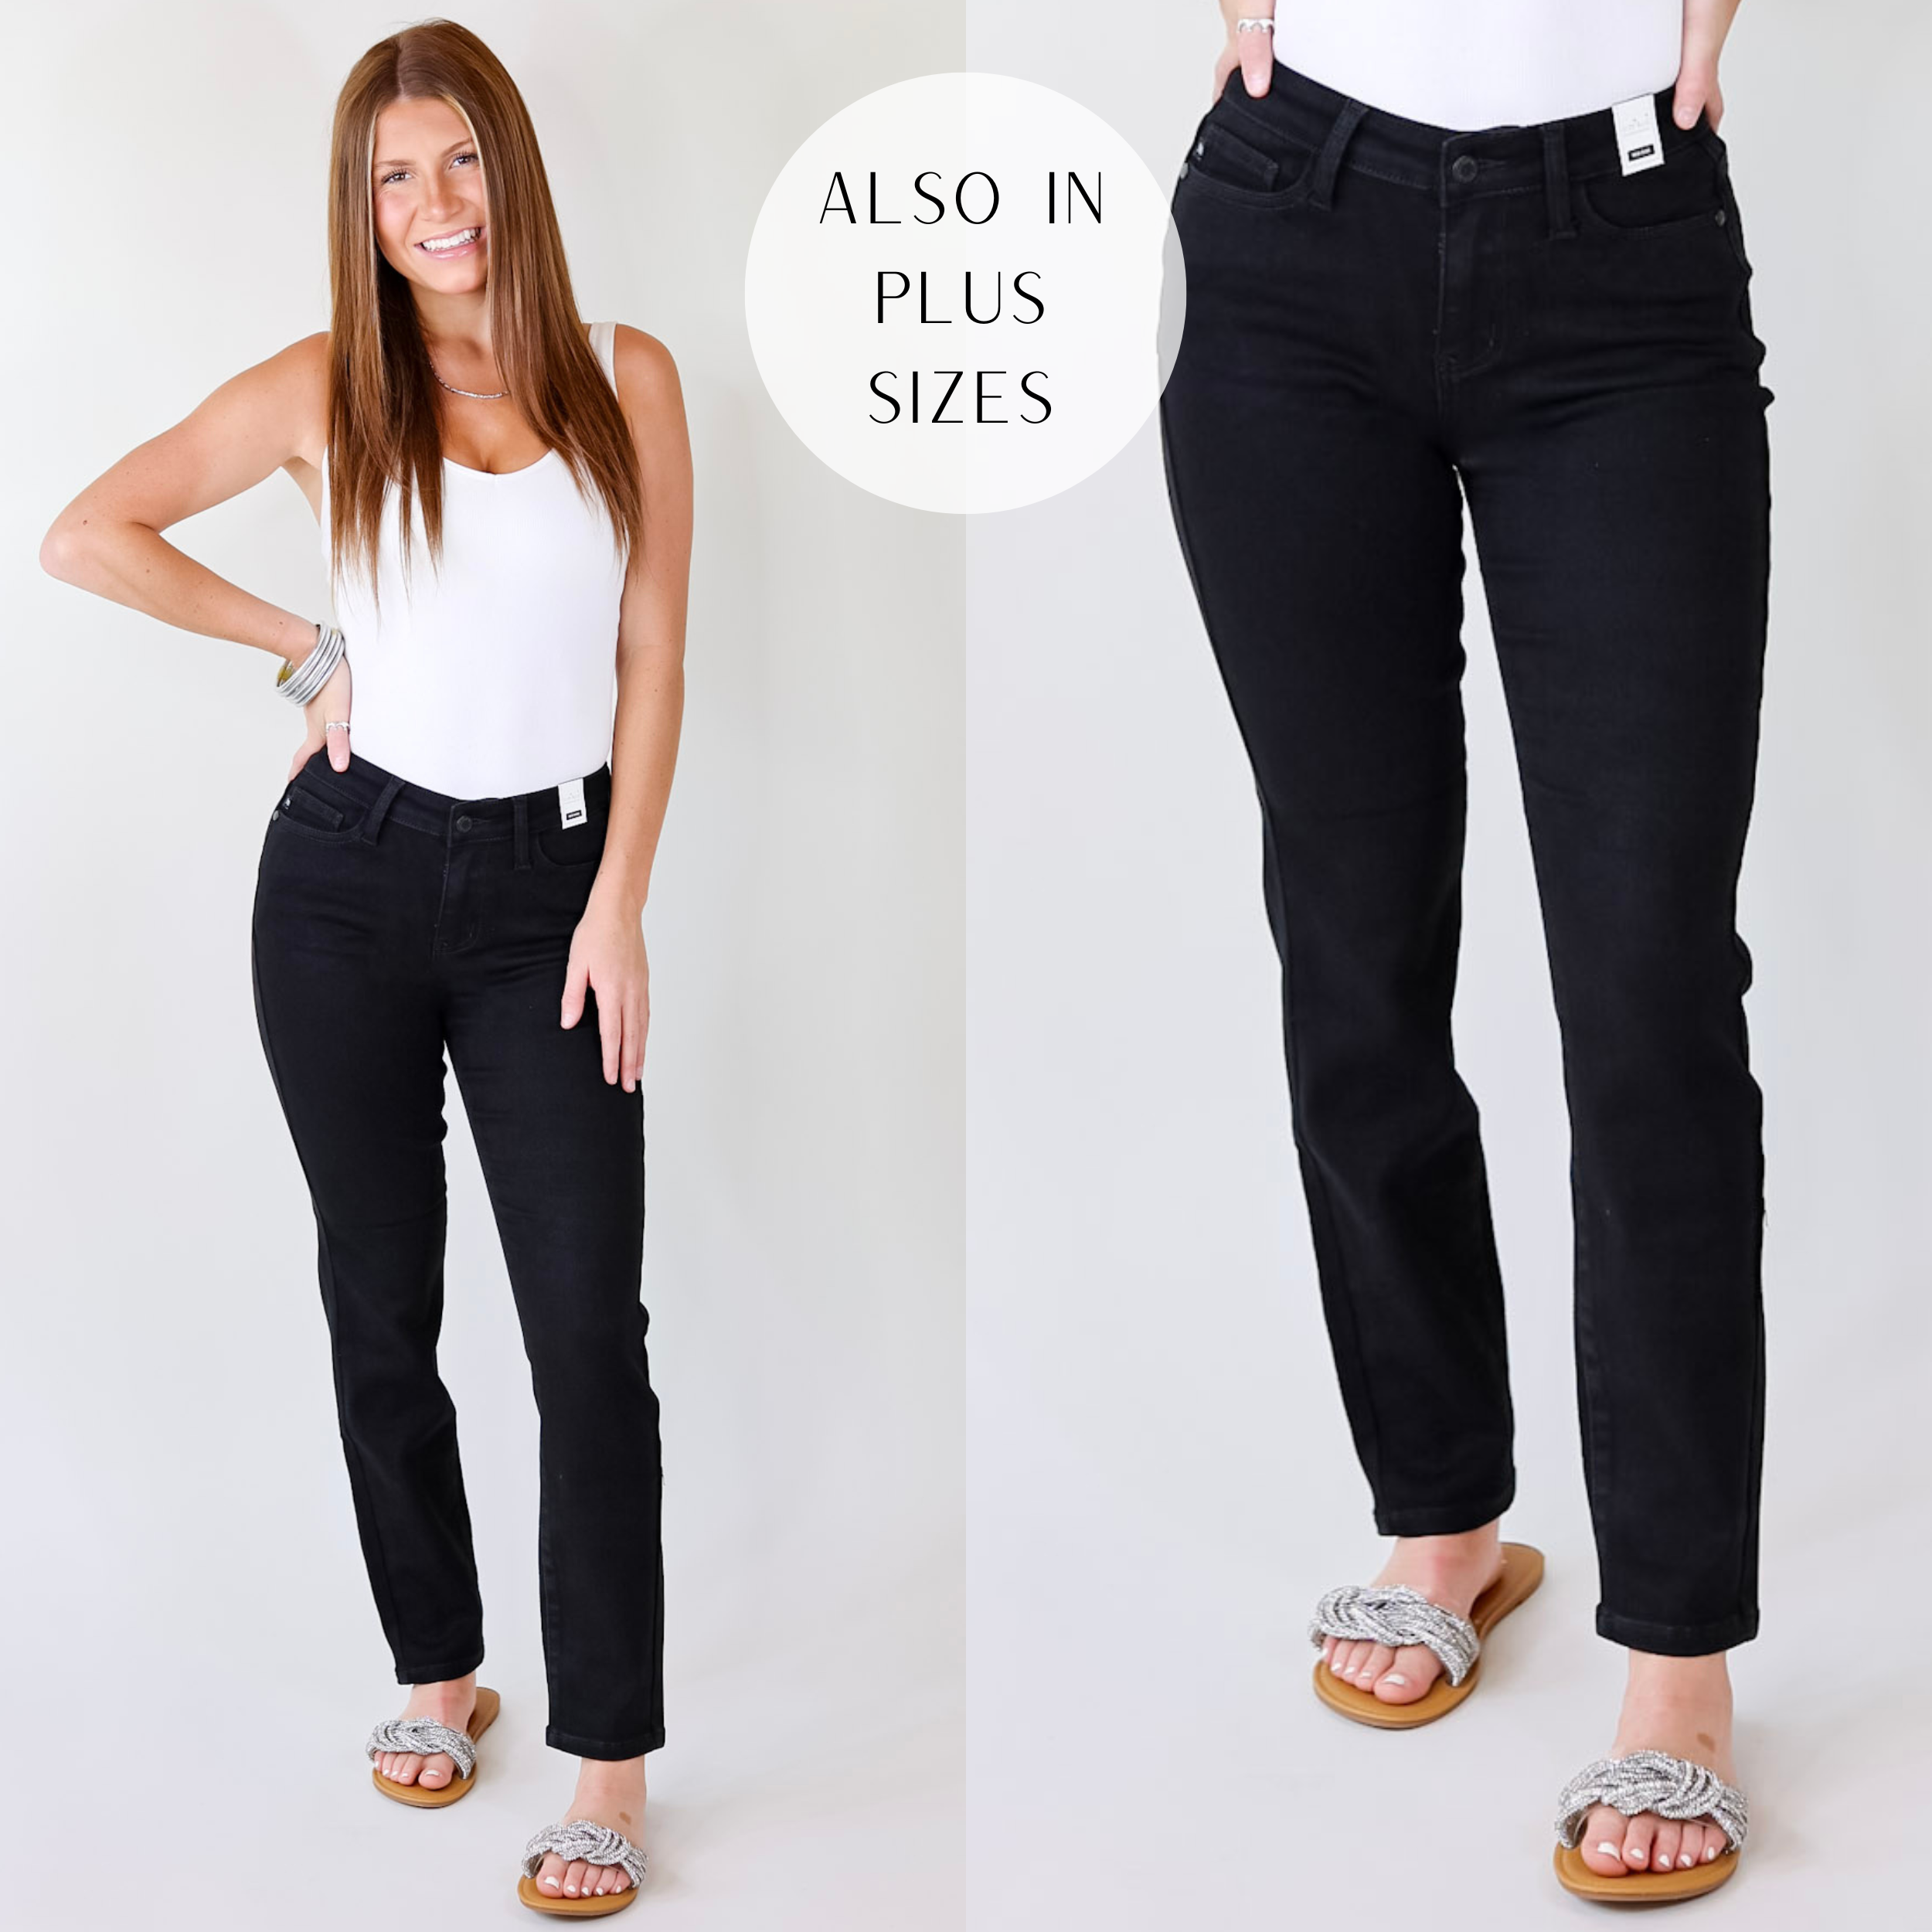 Judy Blue | Main Memories Slim Fit Jeans in Black - Giddy Up Glamour Boutique